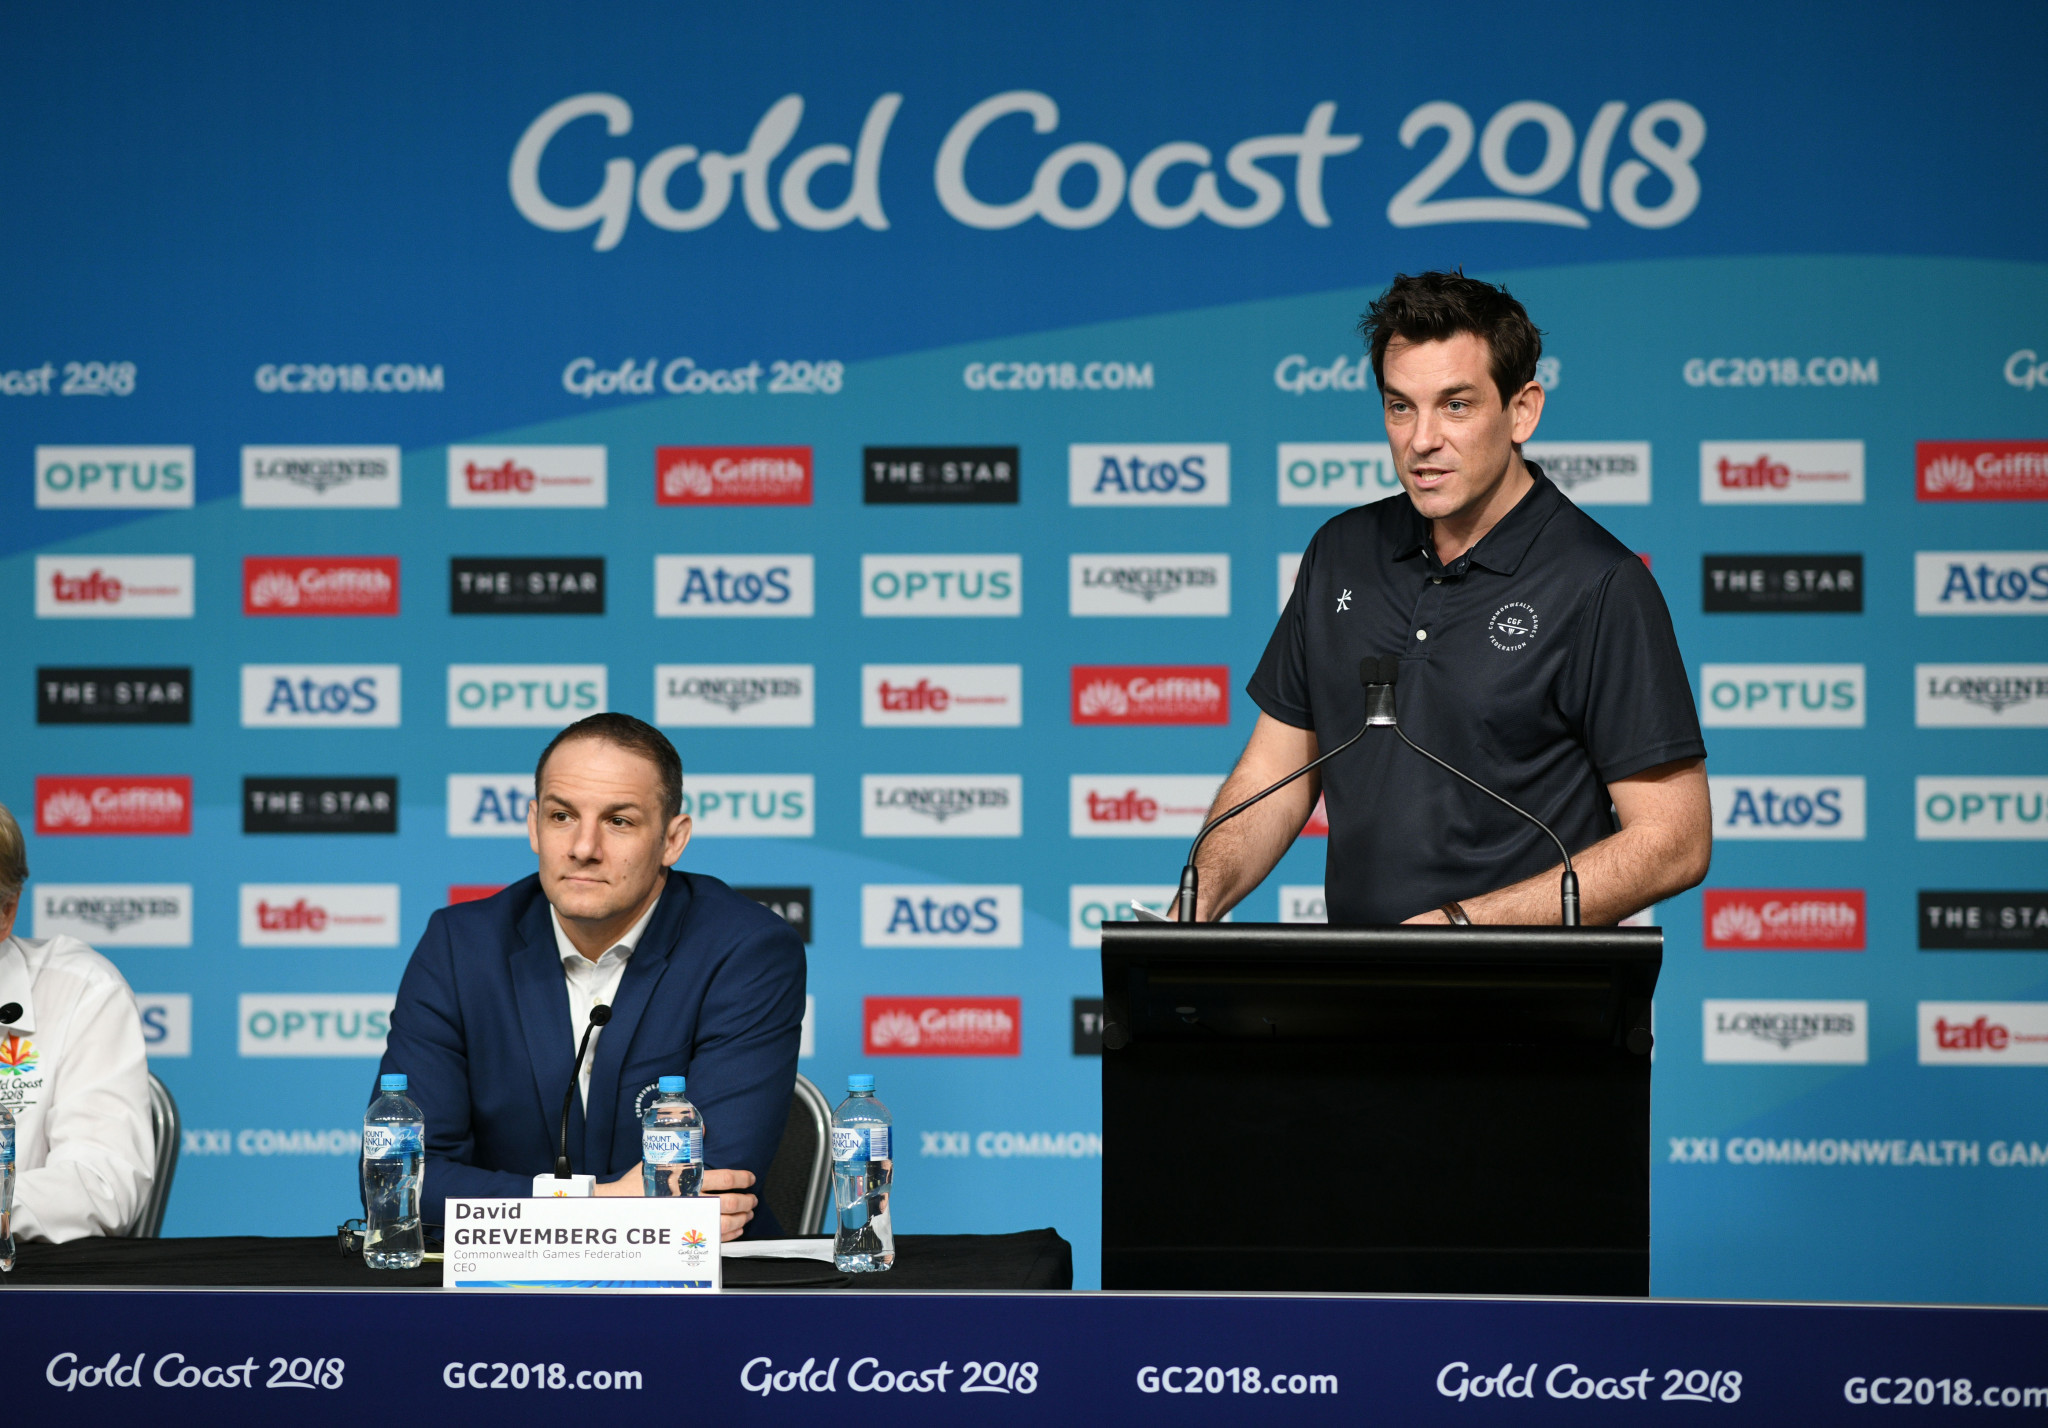 CGF officials have insisted there have not been any positive drugs tests during Gold Coast 2018 ©Getty Images